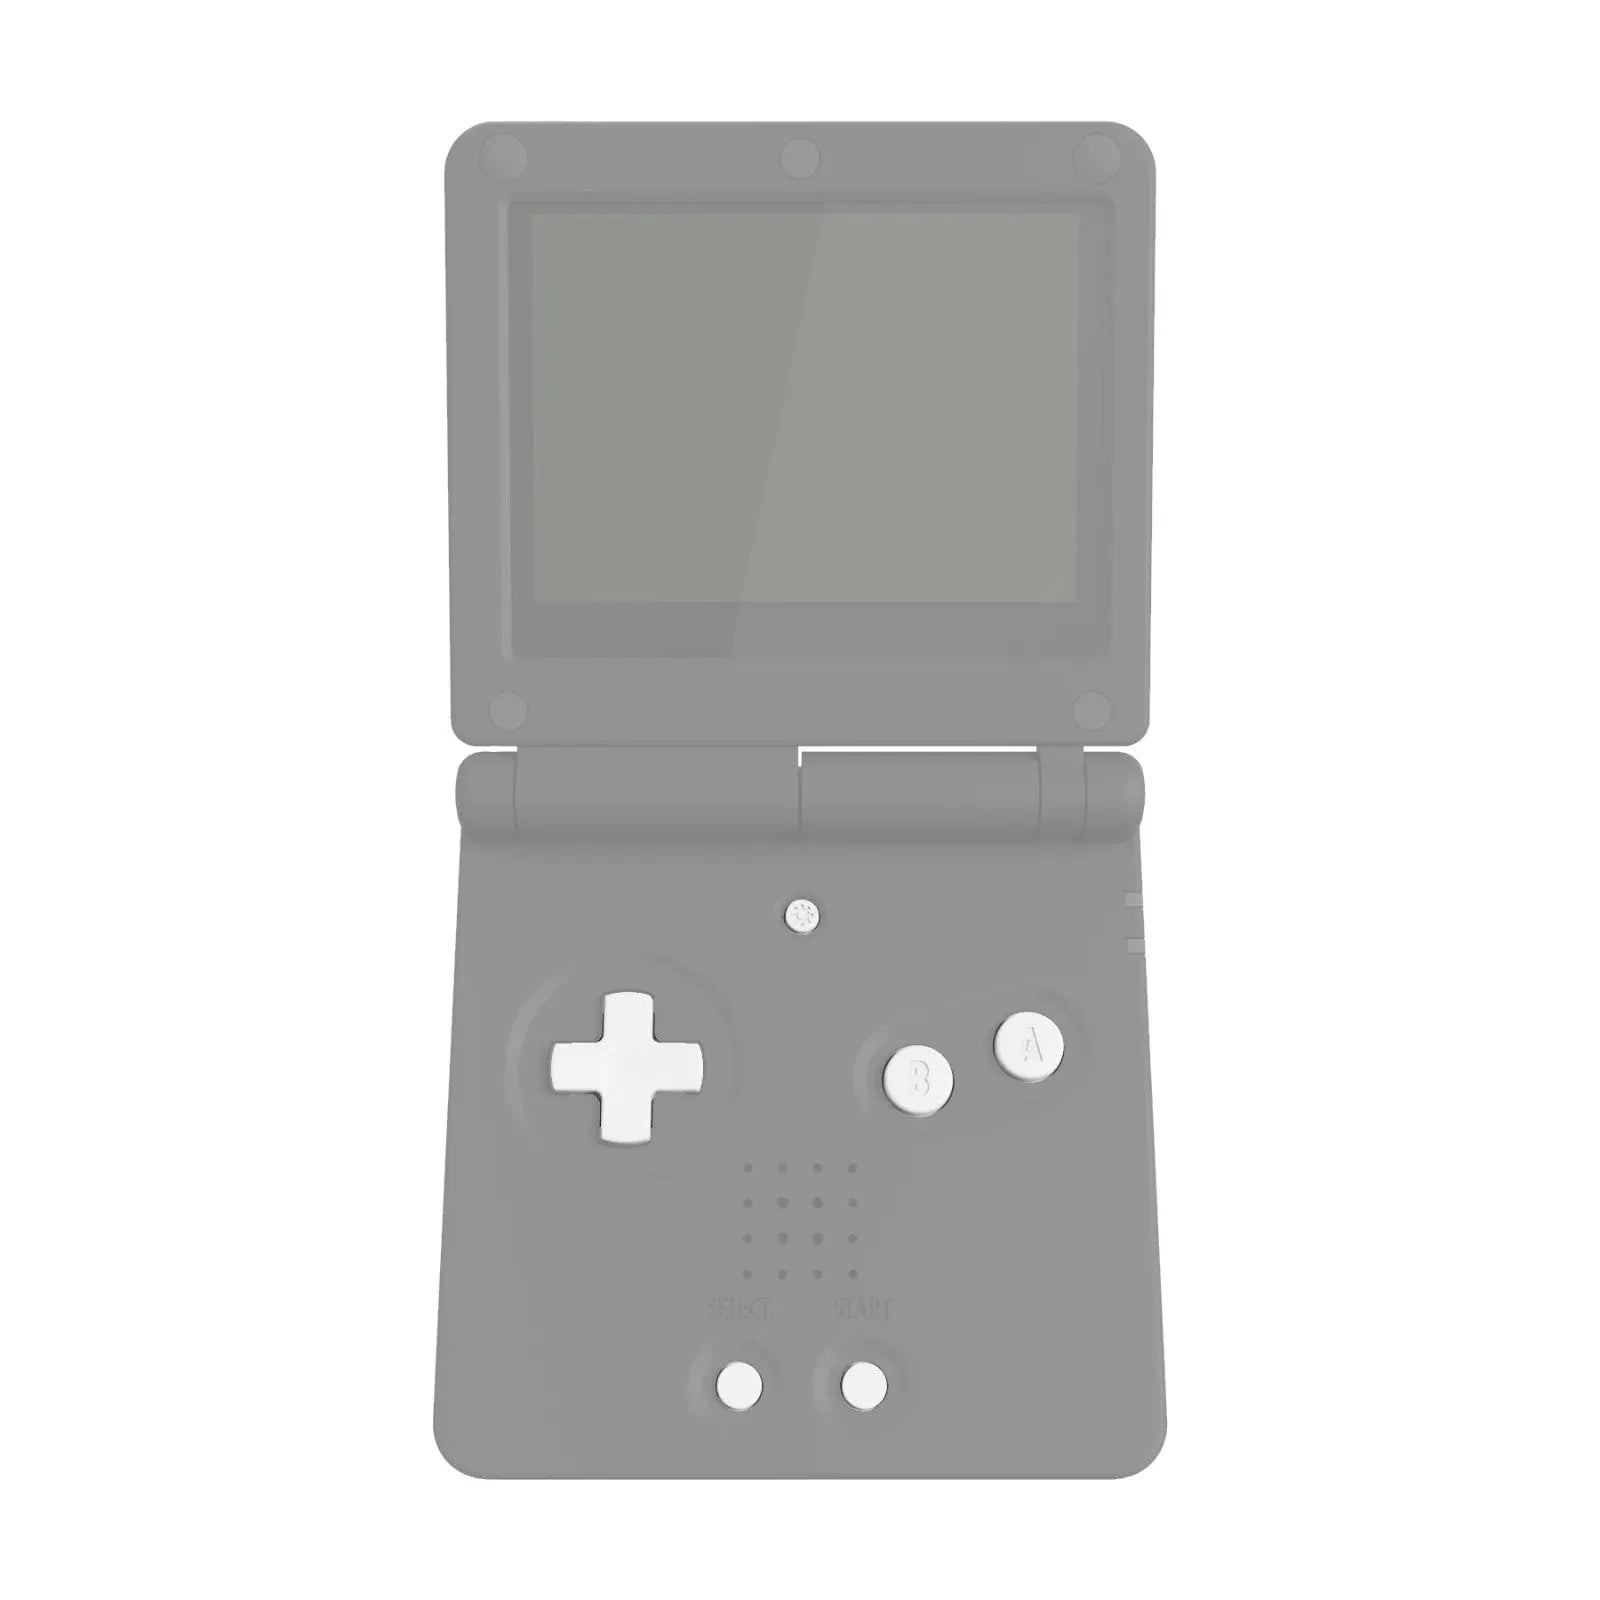 All the Limited Edition Gameboy Advance (GBA SP) and Where to Buy Them